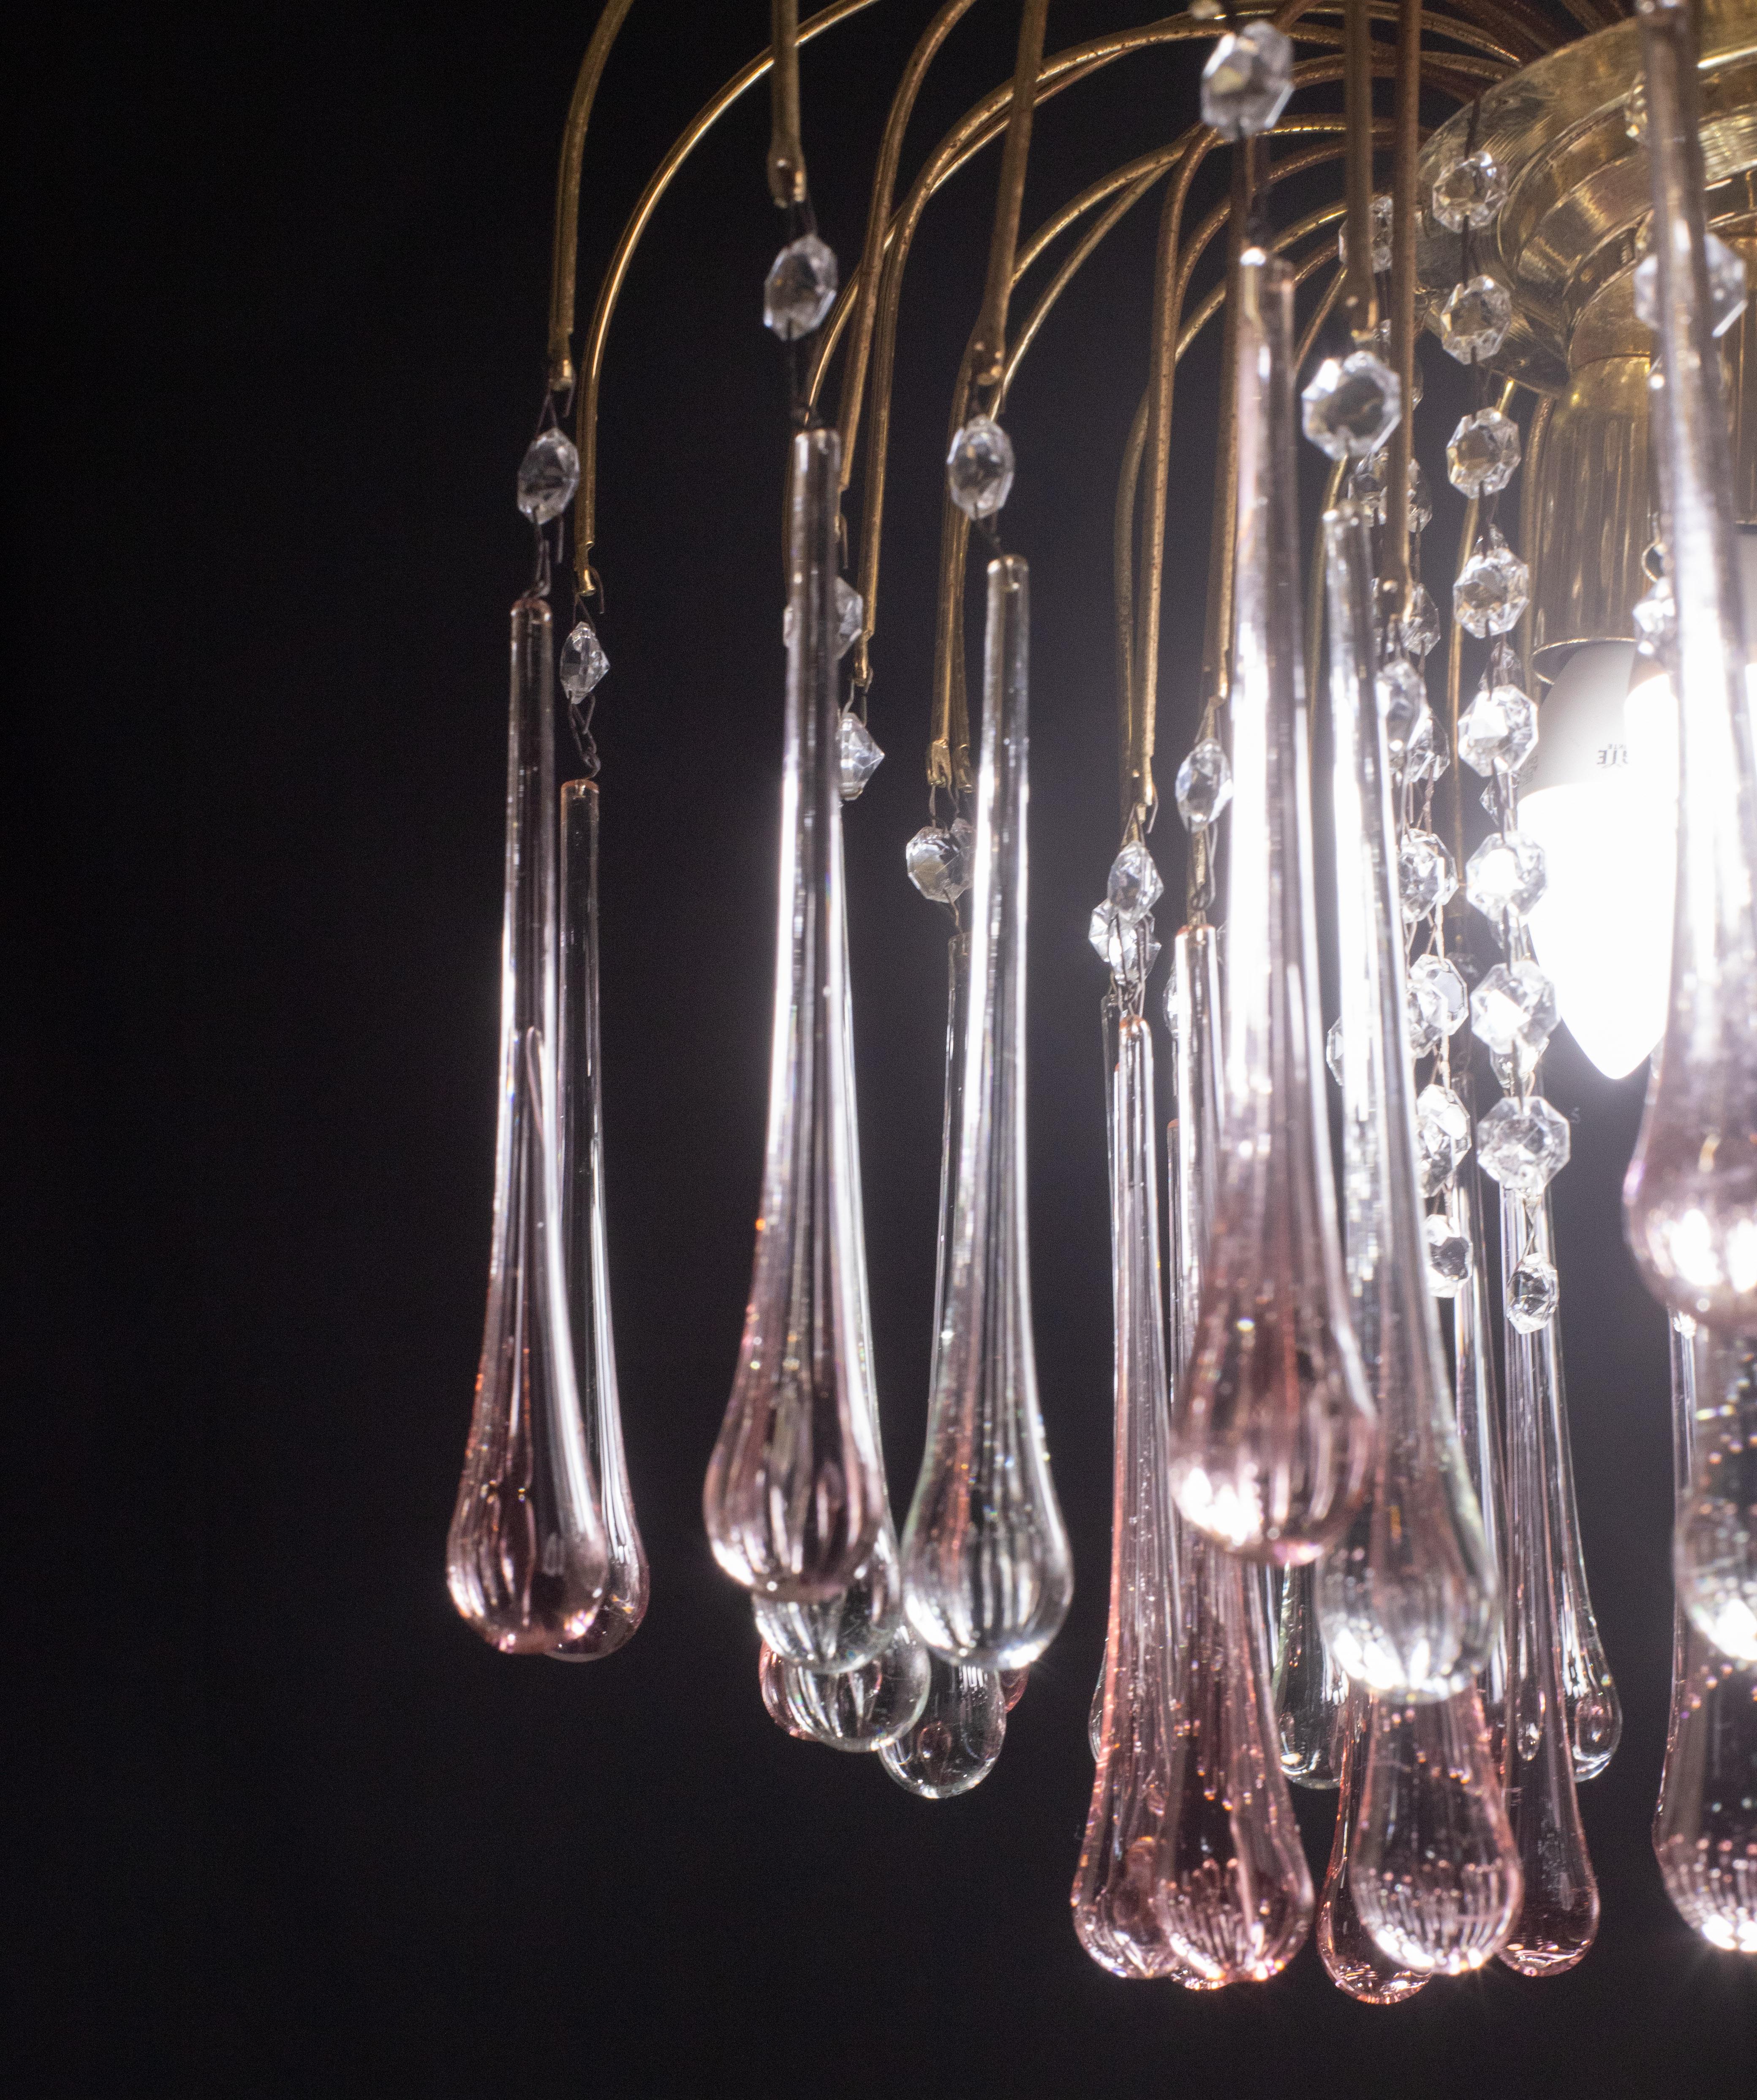 Lady Barbara, Murano Chandelier Pink and White Drops, Venini Style, 1970s For Sale 2